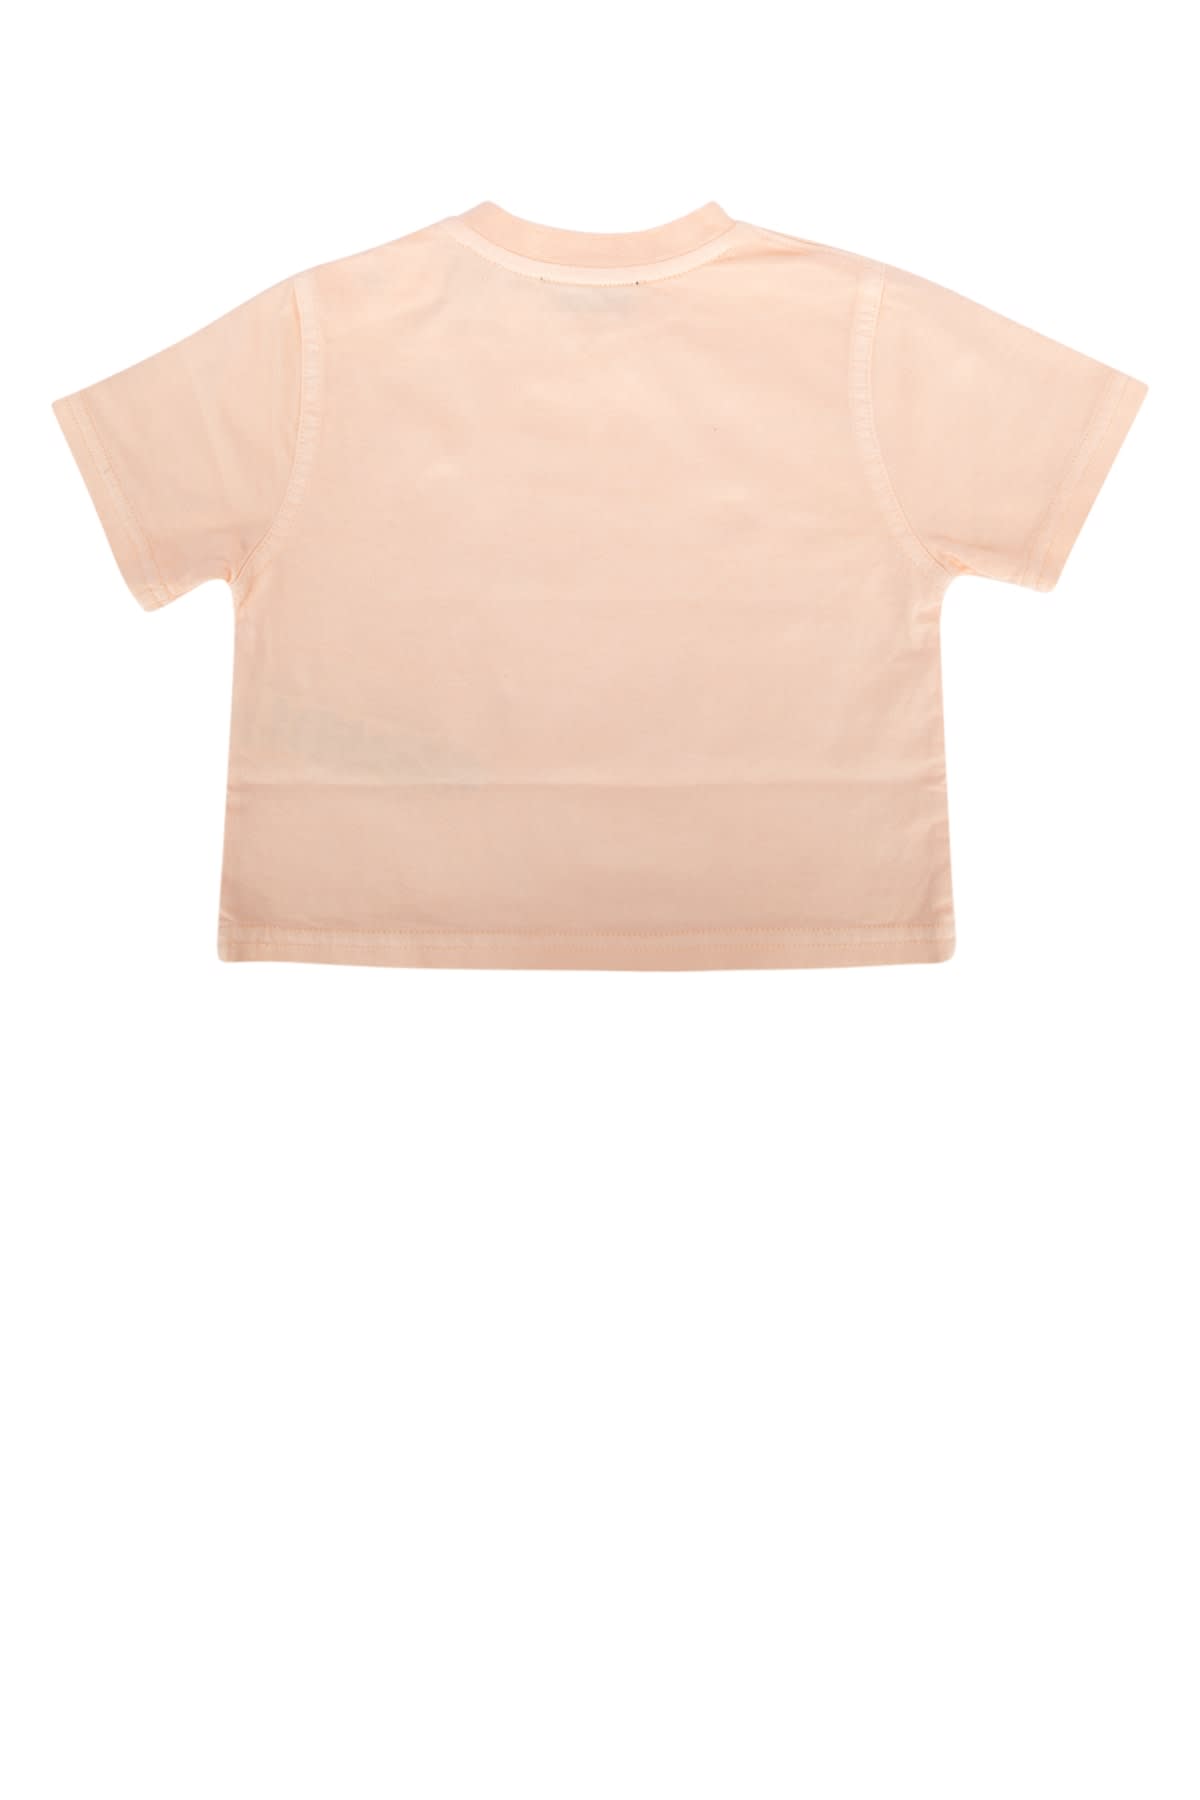 Burberry Babies' Maglia In Pastelpeach